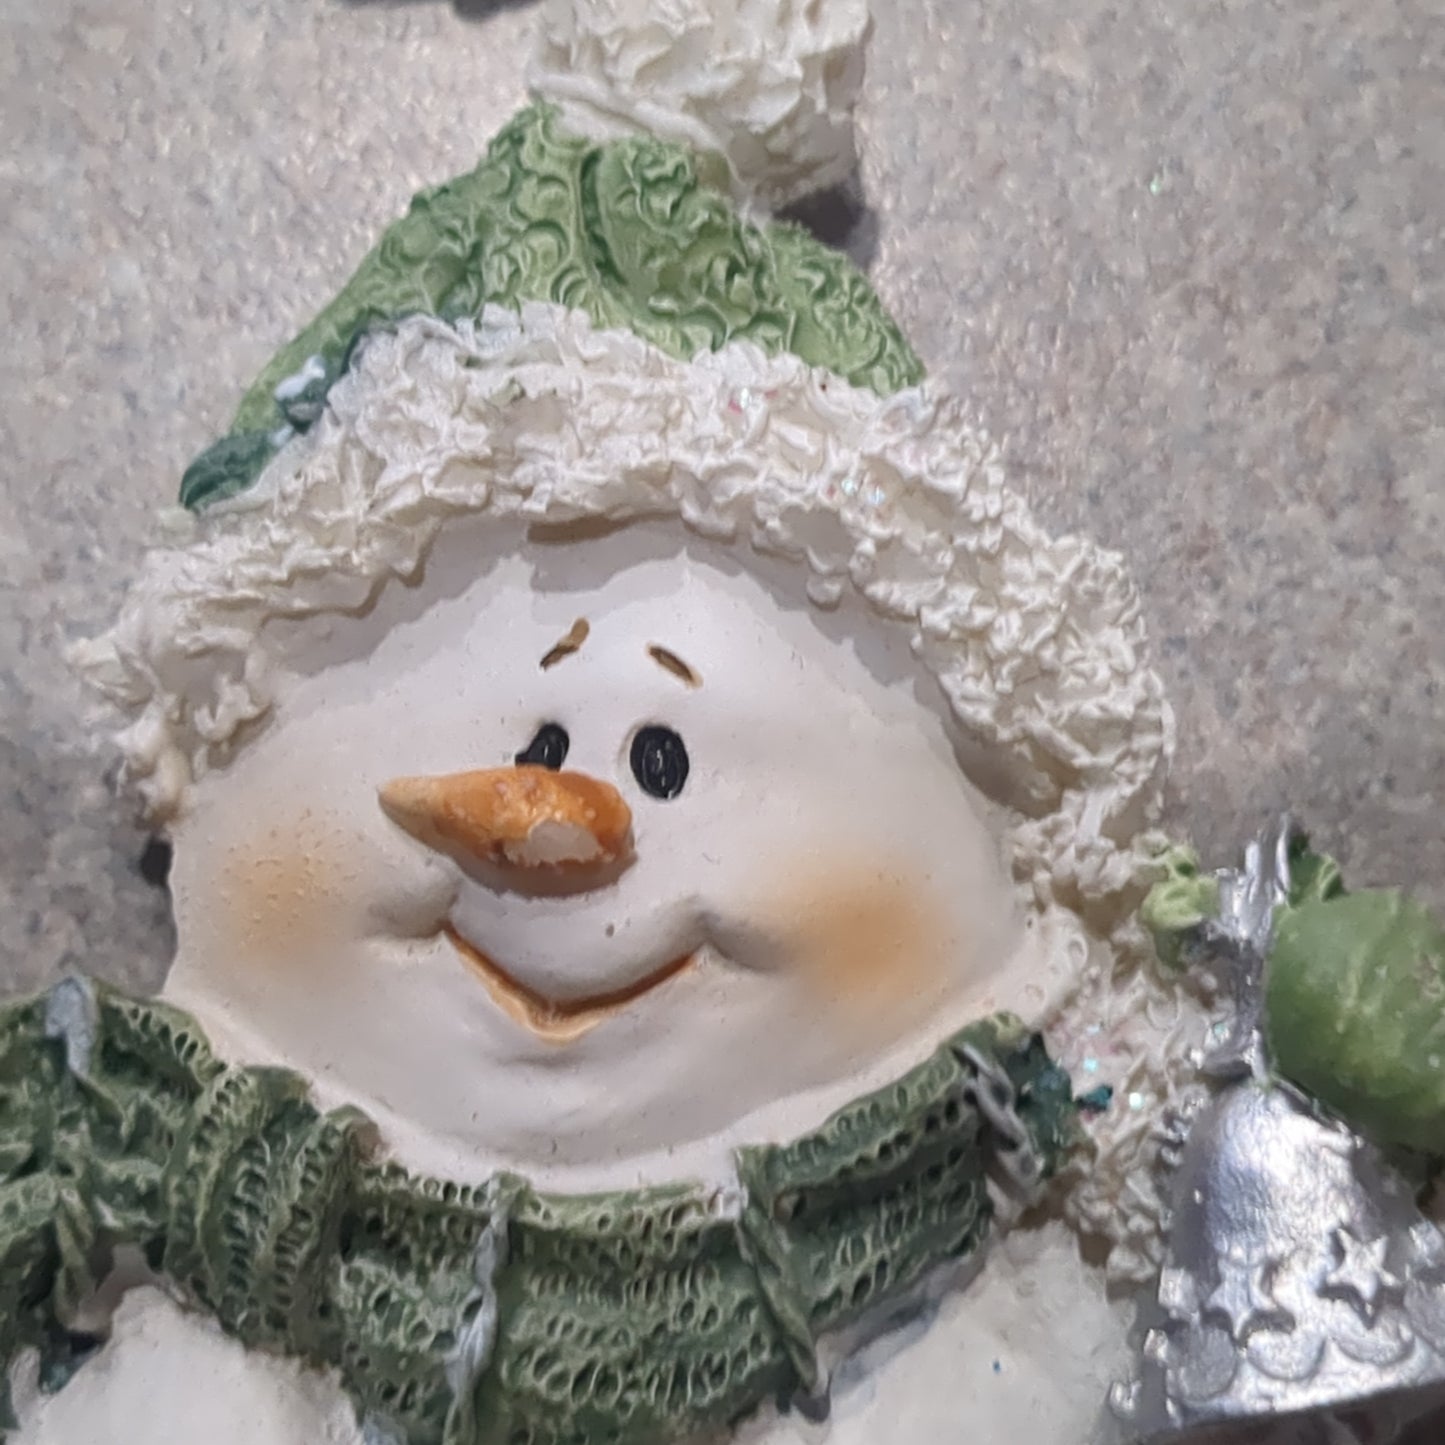 Polycrylic snowman ornament with bell & wreath